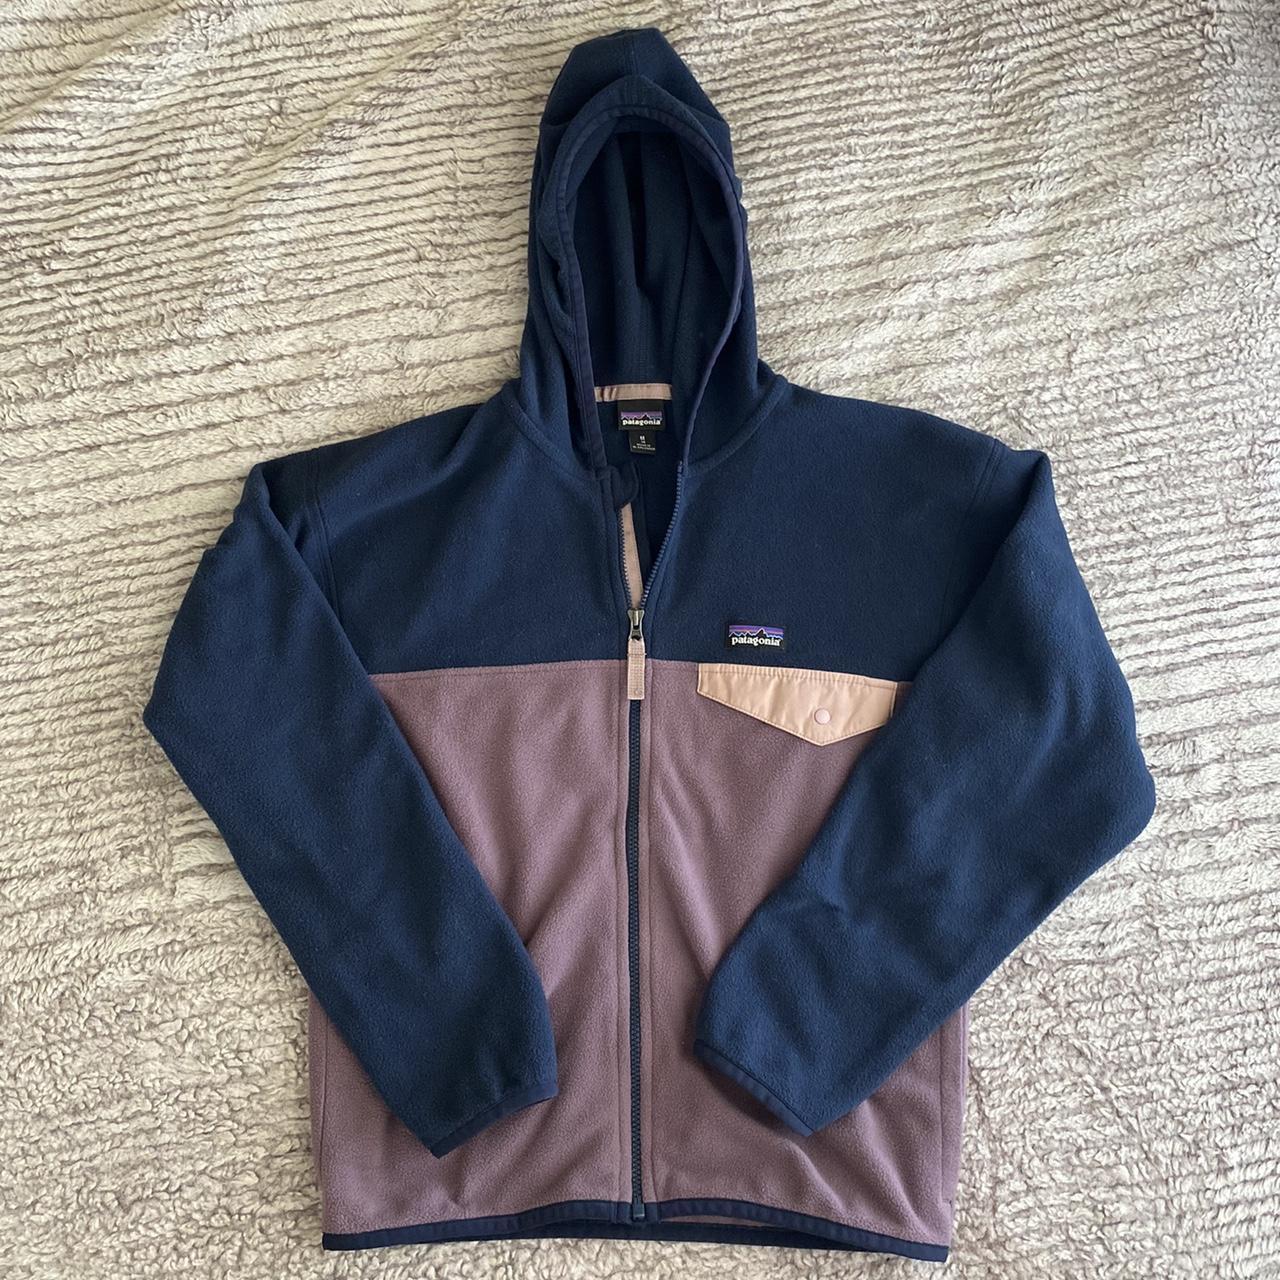 Patagonia Girls Micro D Snap T purple, blue, and   Depop